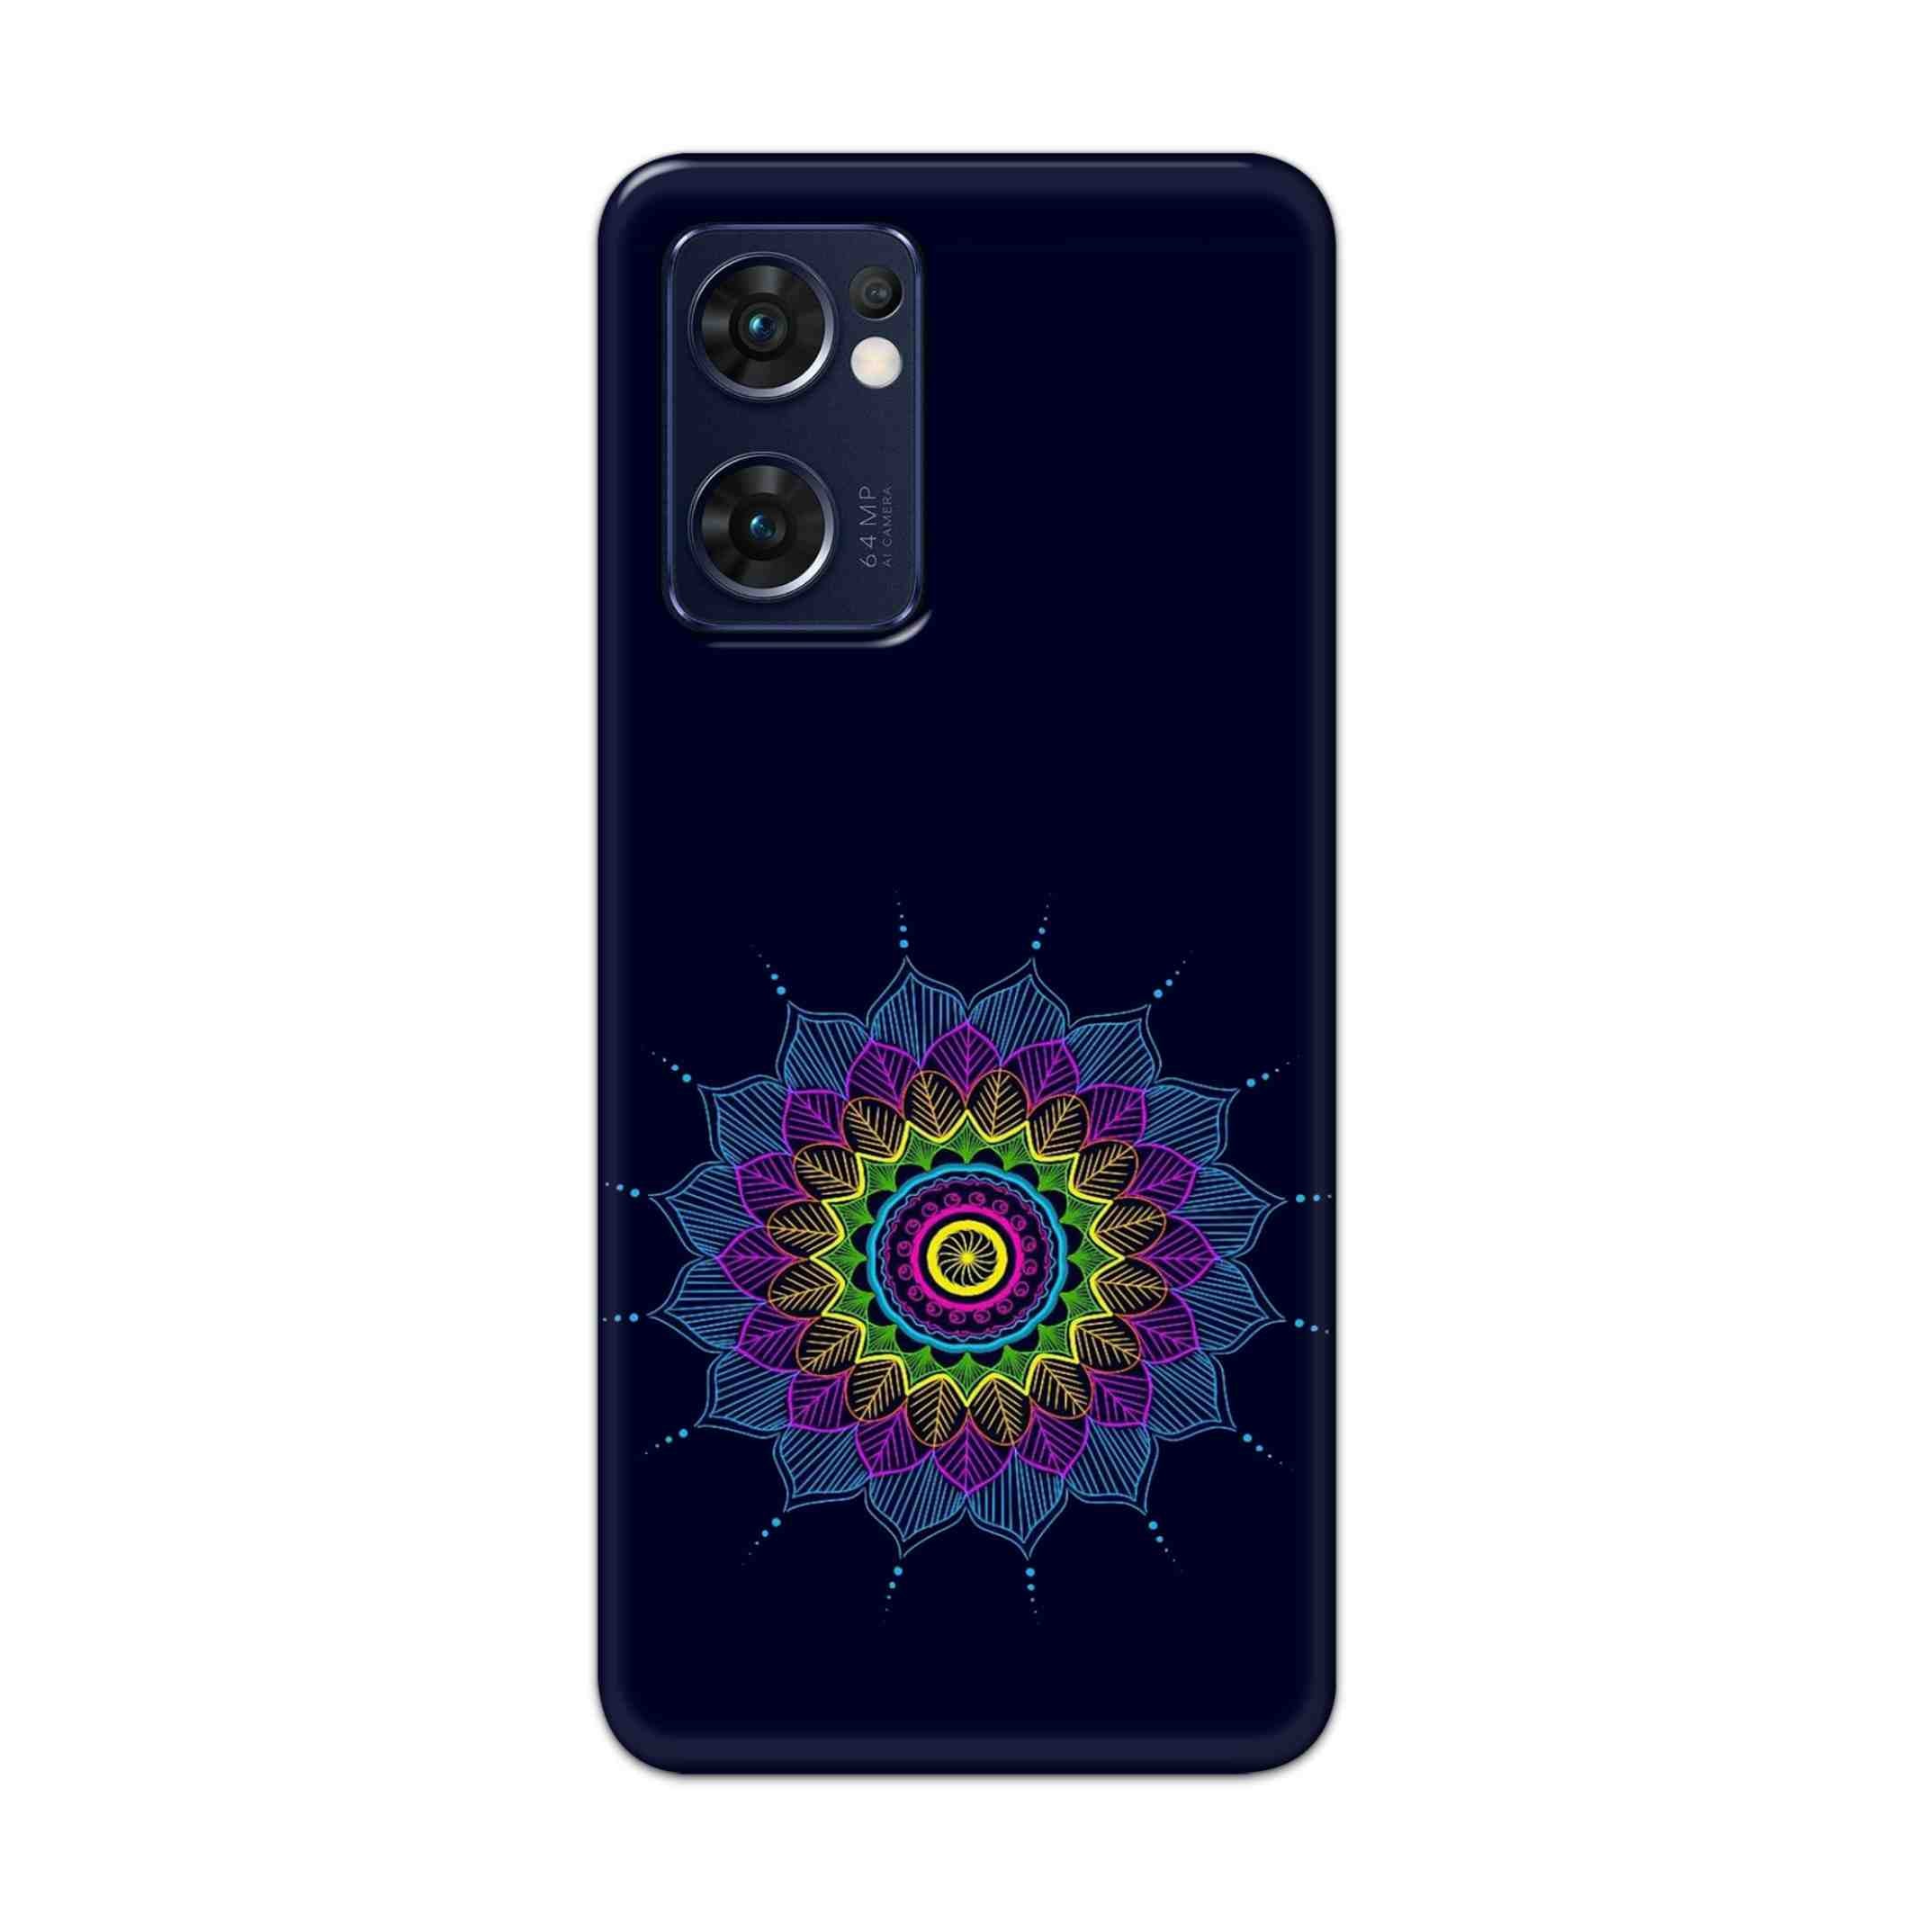 Buy Jung And Mandalas Hard Back Mobile Phone Case Cover For Reno 7 5G Online